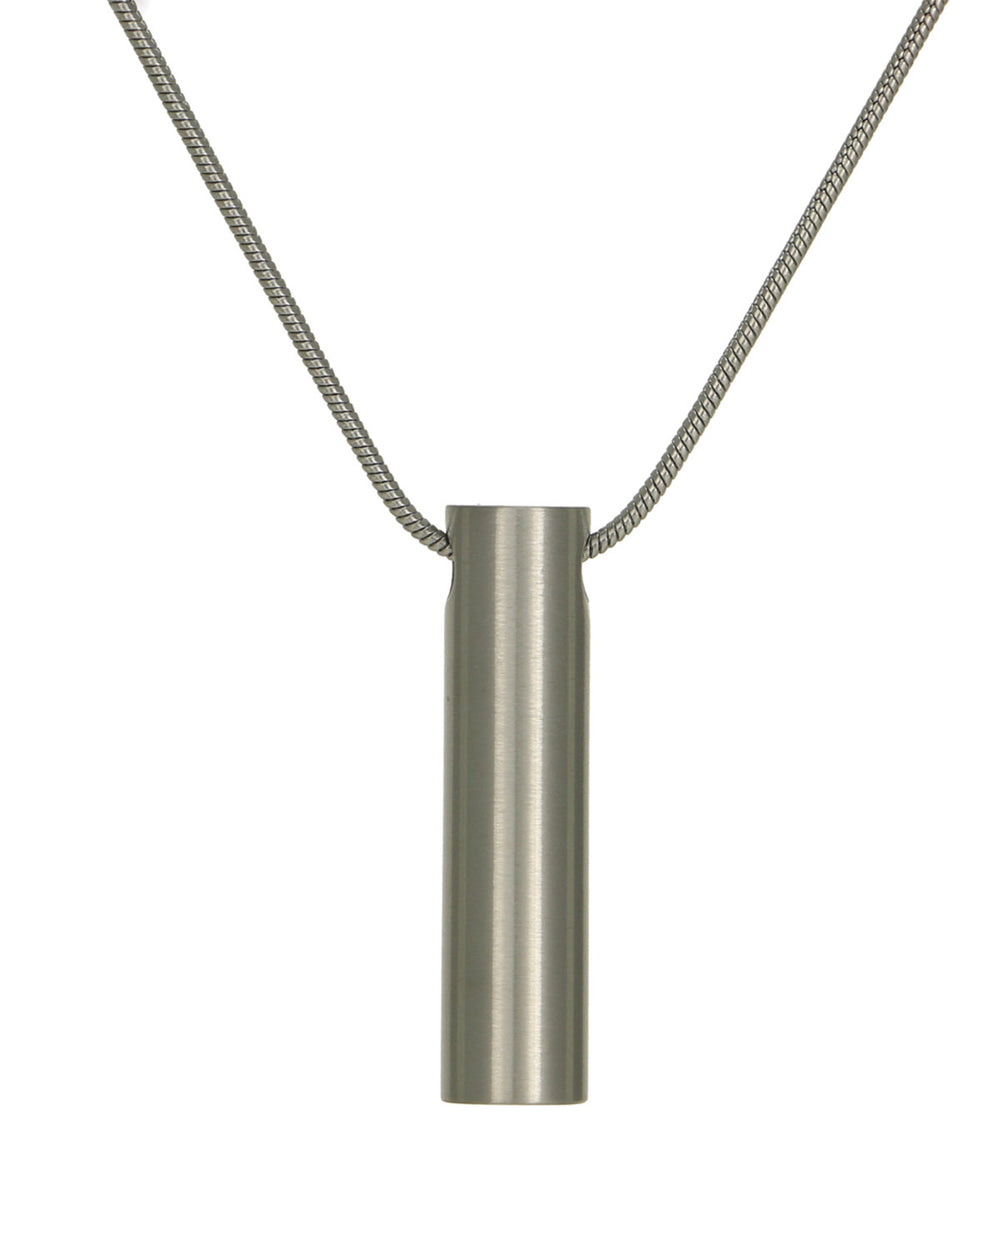 Cylinder Jewelry Pendant - Pewter